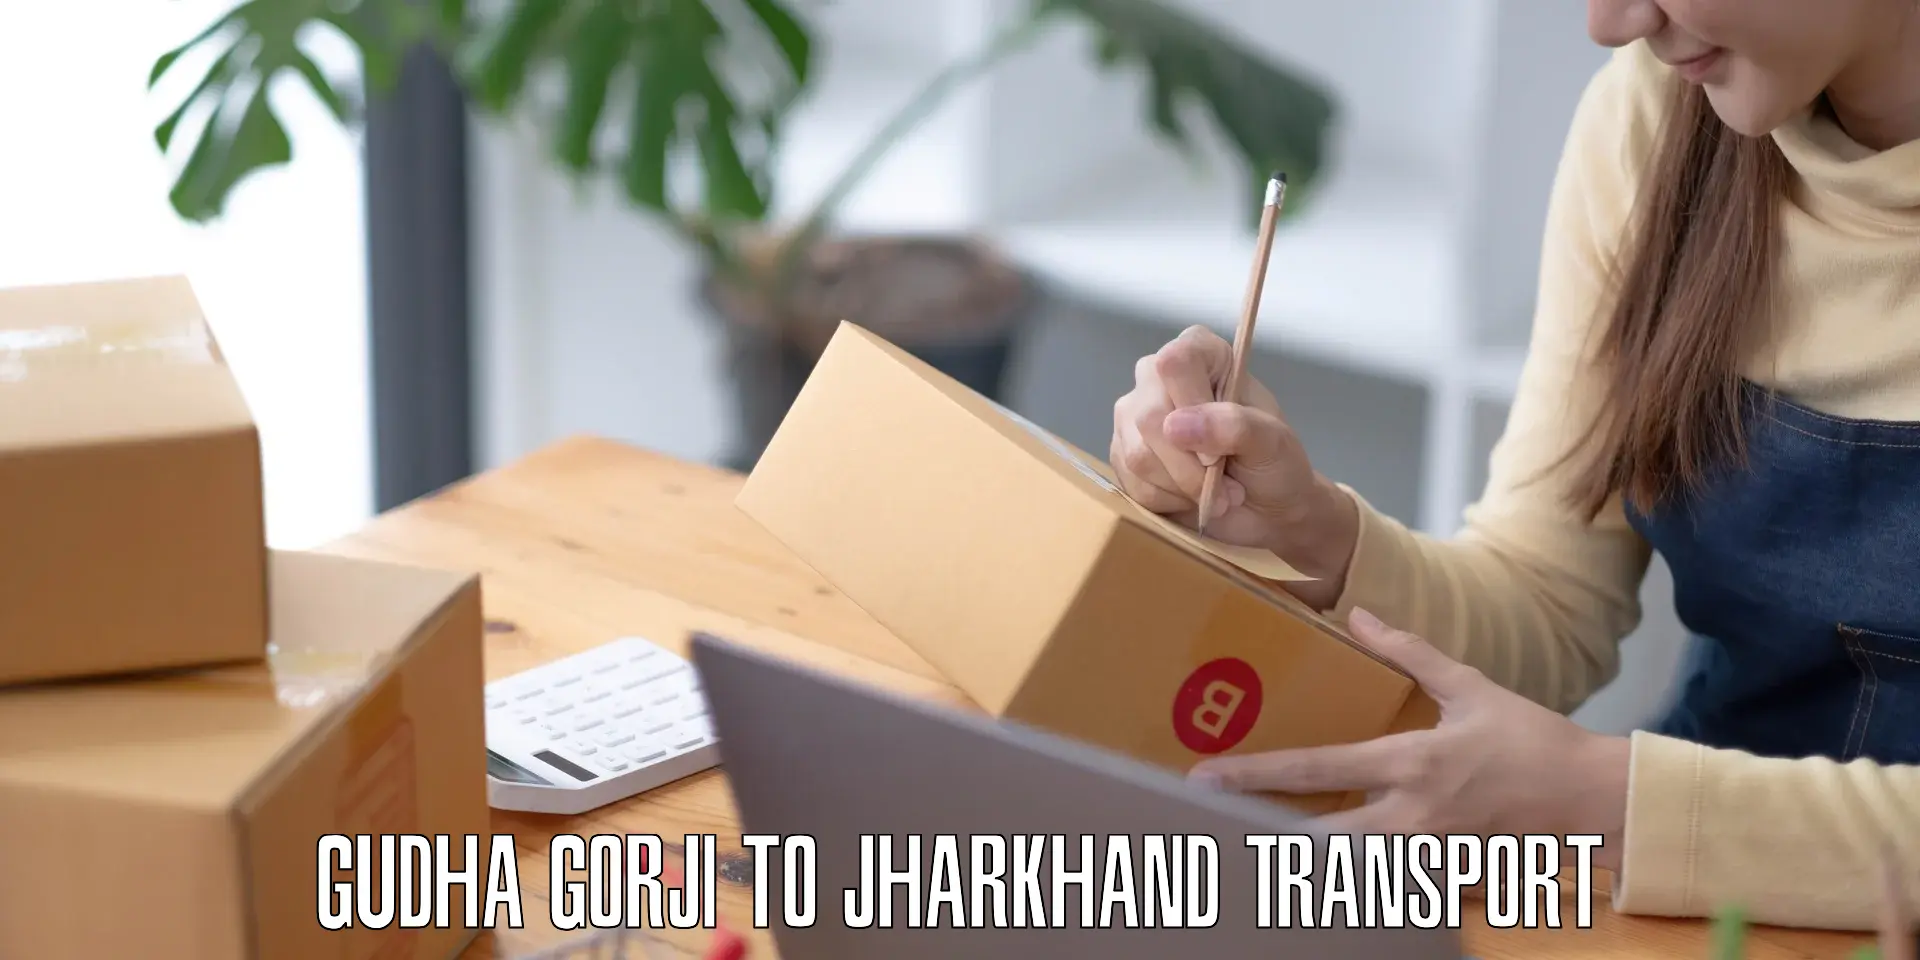 Package delivery services Gudha Gorji to Jharkhand